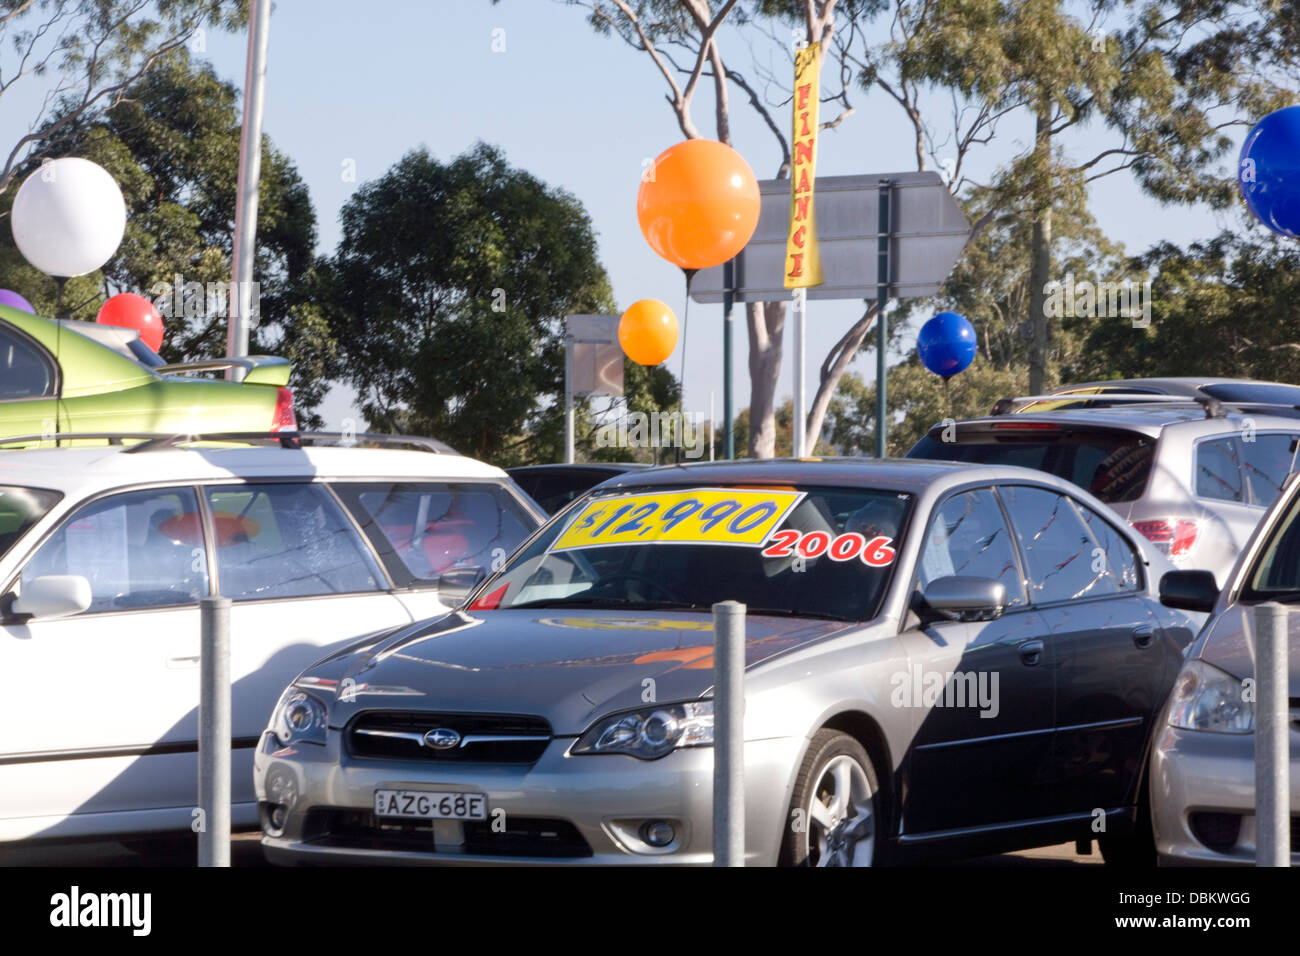 Used and second hand motor cars for sale at a car lot garage in Sydney